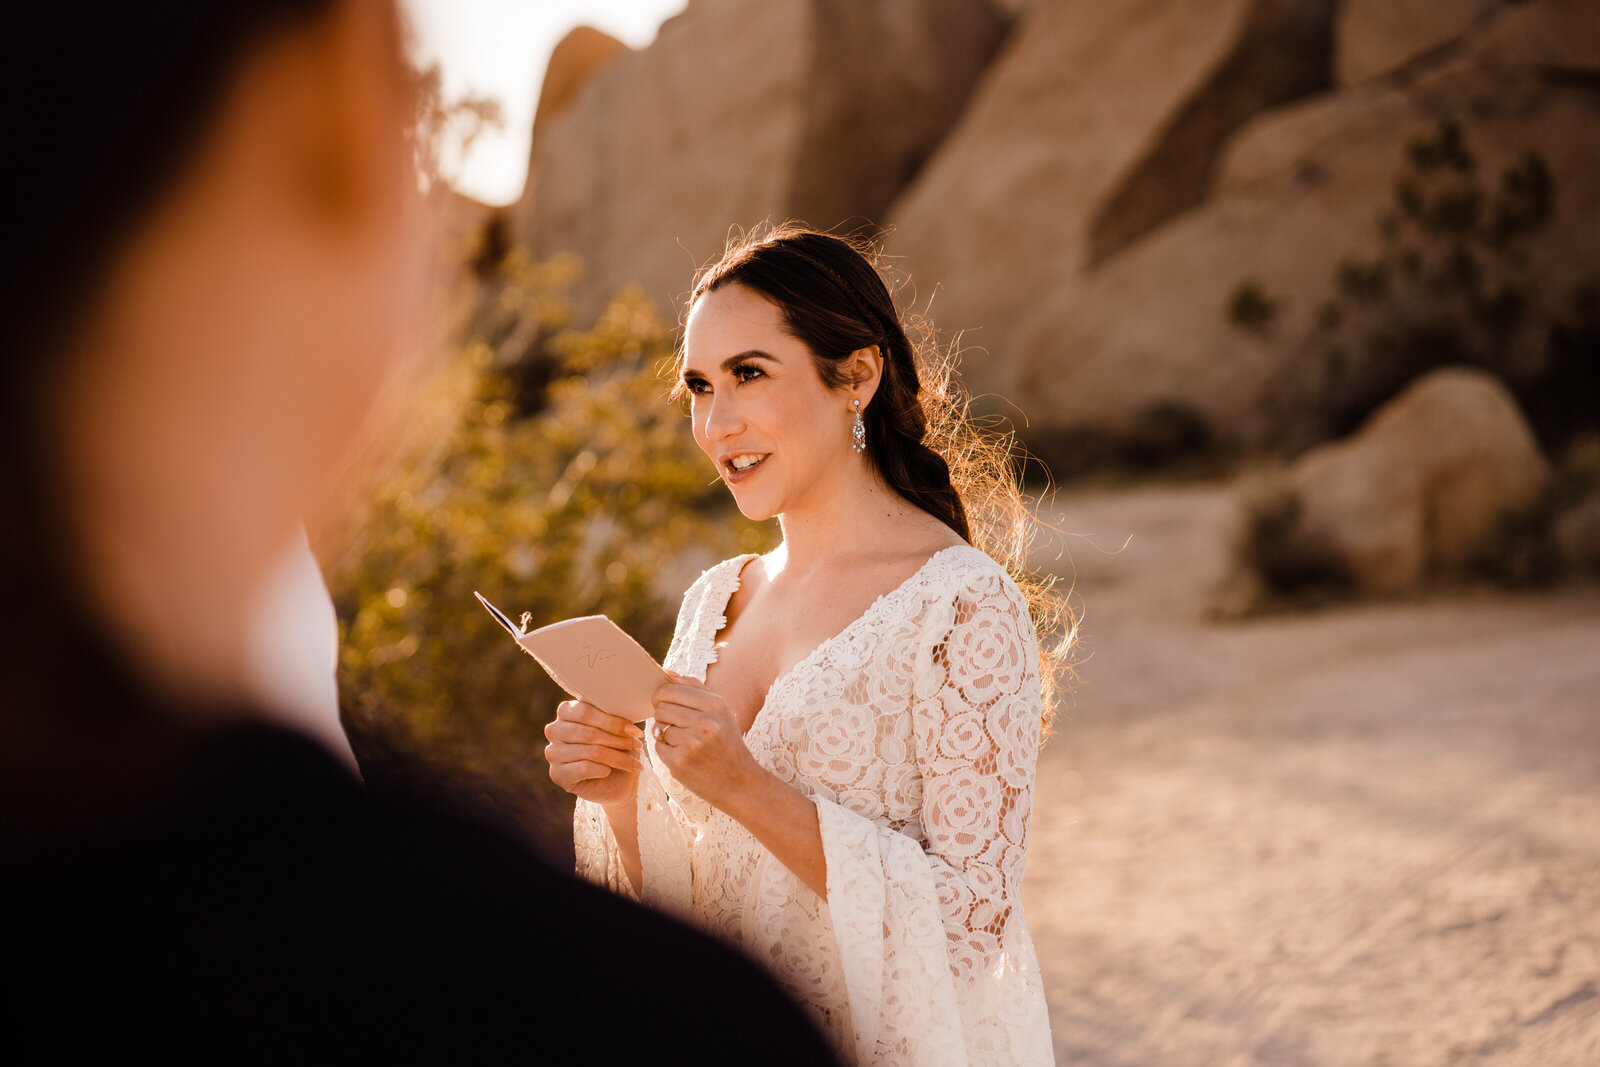 Bride reads vows to groom at Joshua Tree elopement ceremony | planning an elopement | adventurous, fun, warm wedding photos by Kept Record | www.keptrecord.com